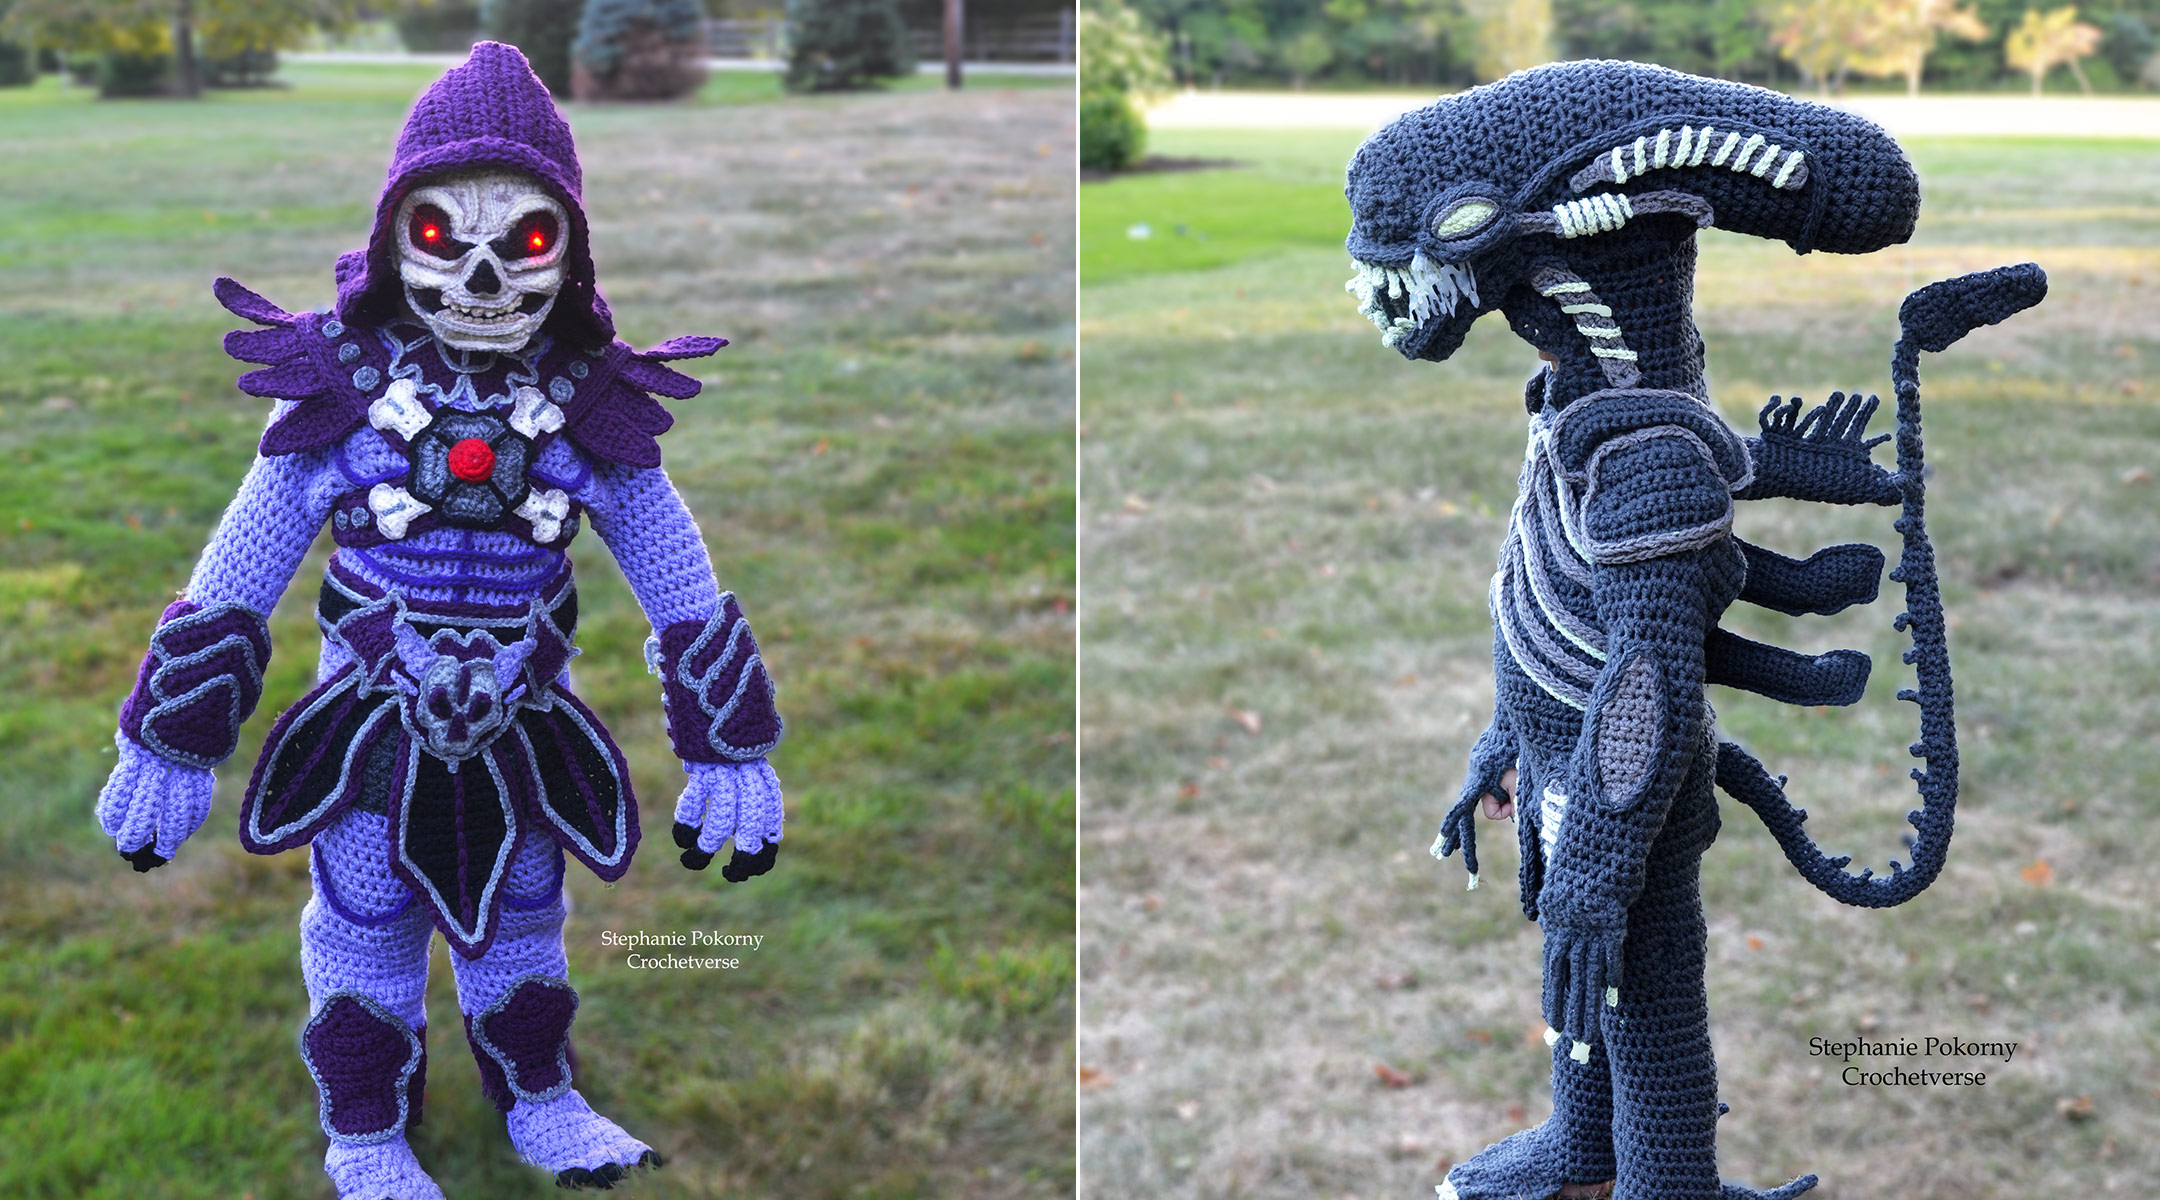 highly detailed crocheted halloween costumes, skeletor and alien